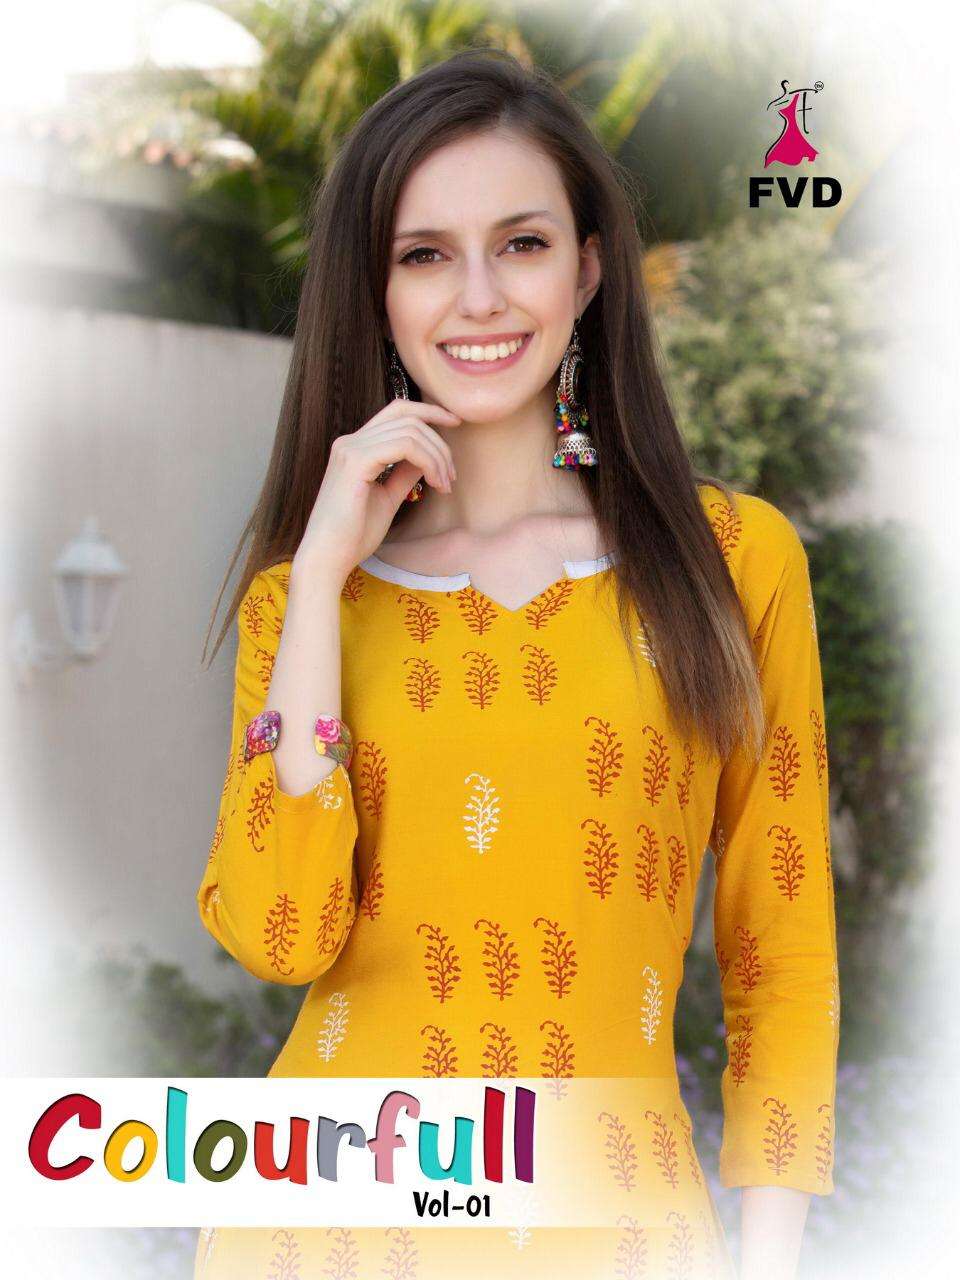 COLOURFULL VOL-1 BY FVD 212 TO 218 SERIES DESIGNER STYLISH FANCY COLORFUL BEAUTIFUL PARTY WEAR & ETHNIC WEAR COLLECTION RAYON FOIL PRINT KURTIS WITH BOTTOM AT WHOLESALE PRICE